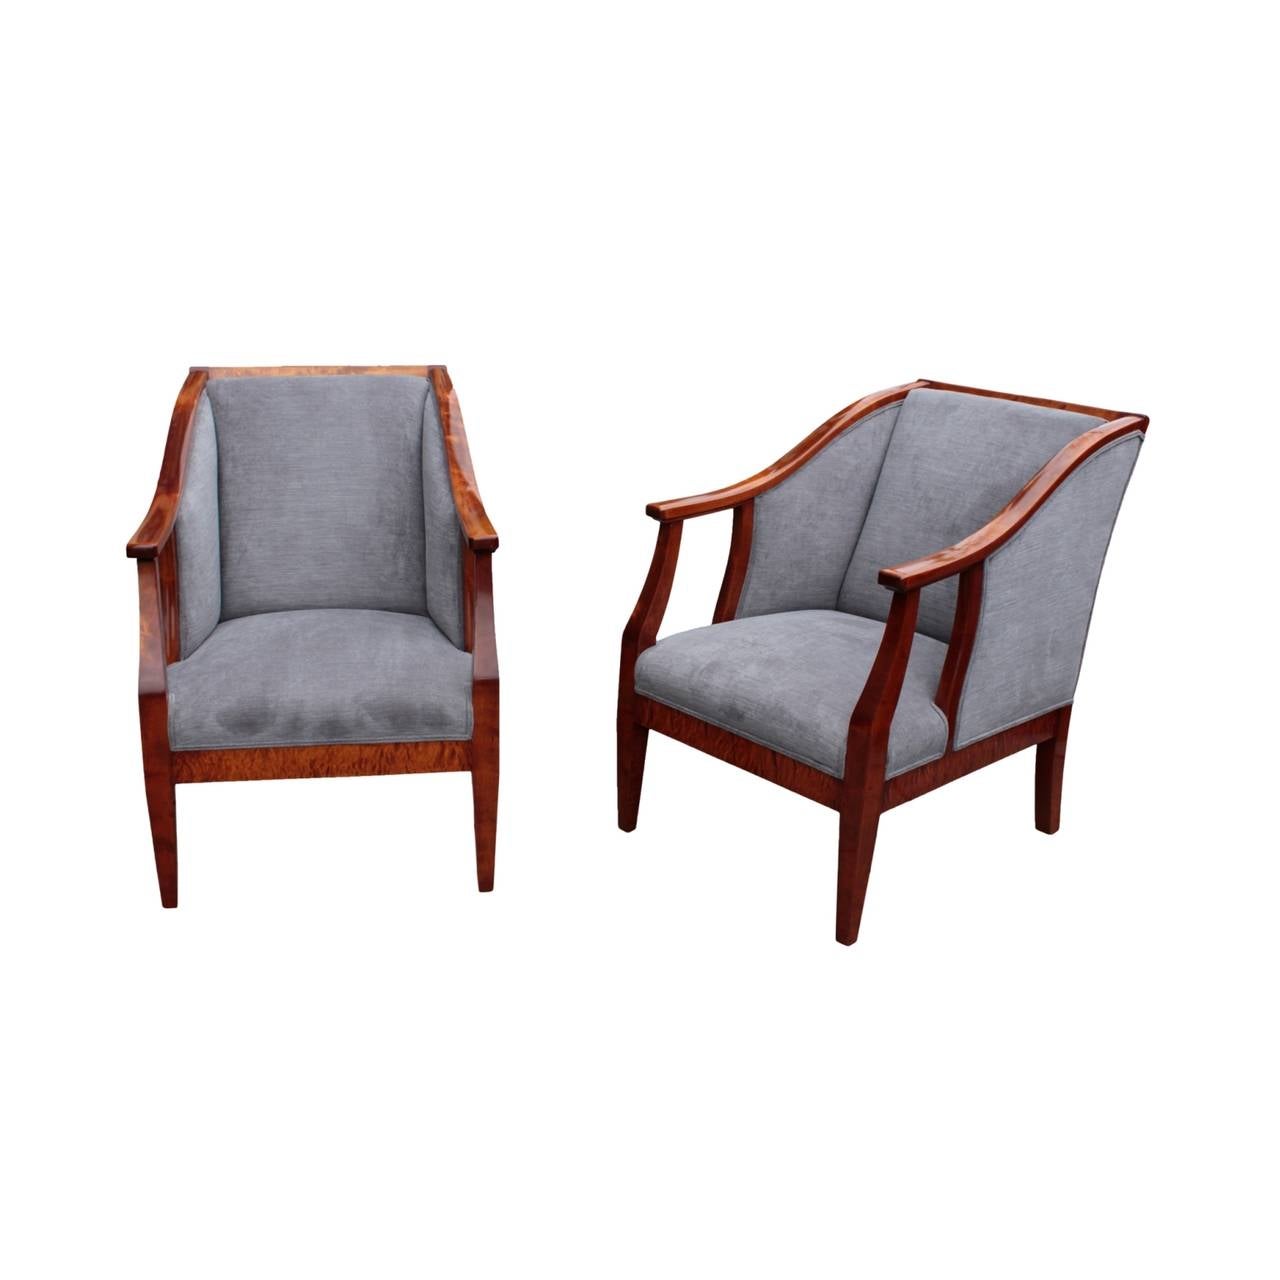 Rectangular slanted backrest, semi-upholstered pierced sides, down-swept arms and tapered legs. In flame birch. In neoclassical form, produced during Grace (Art Deco) period.